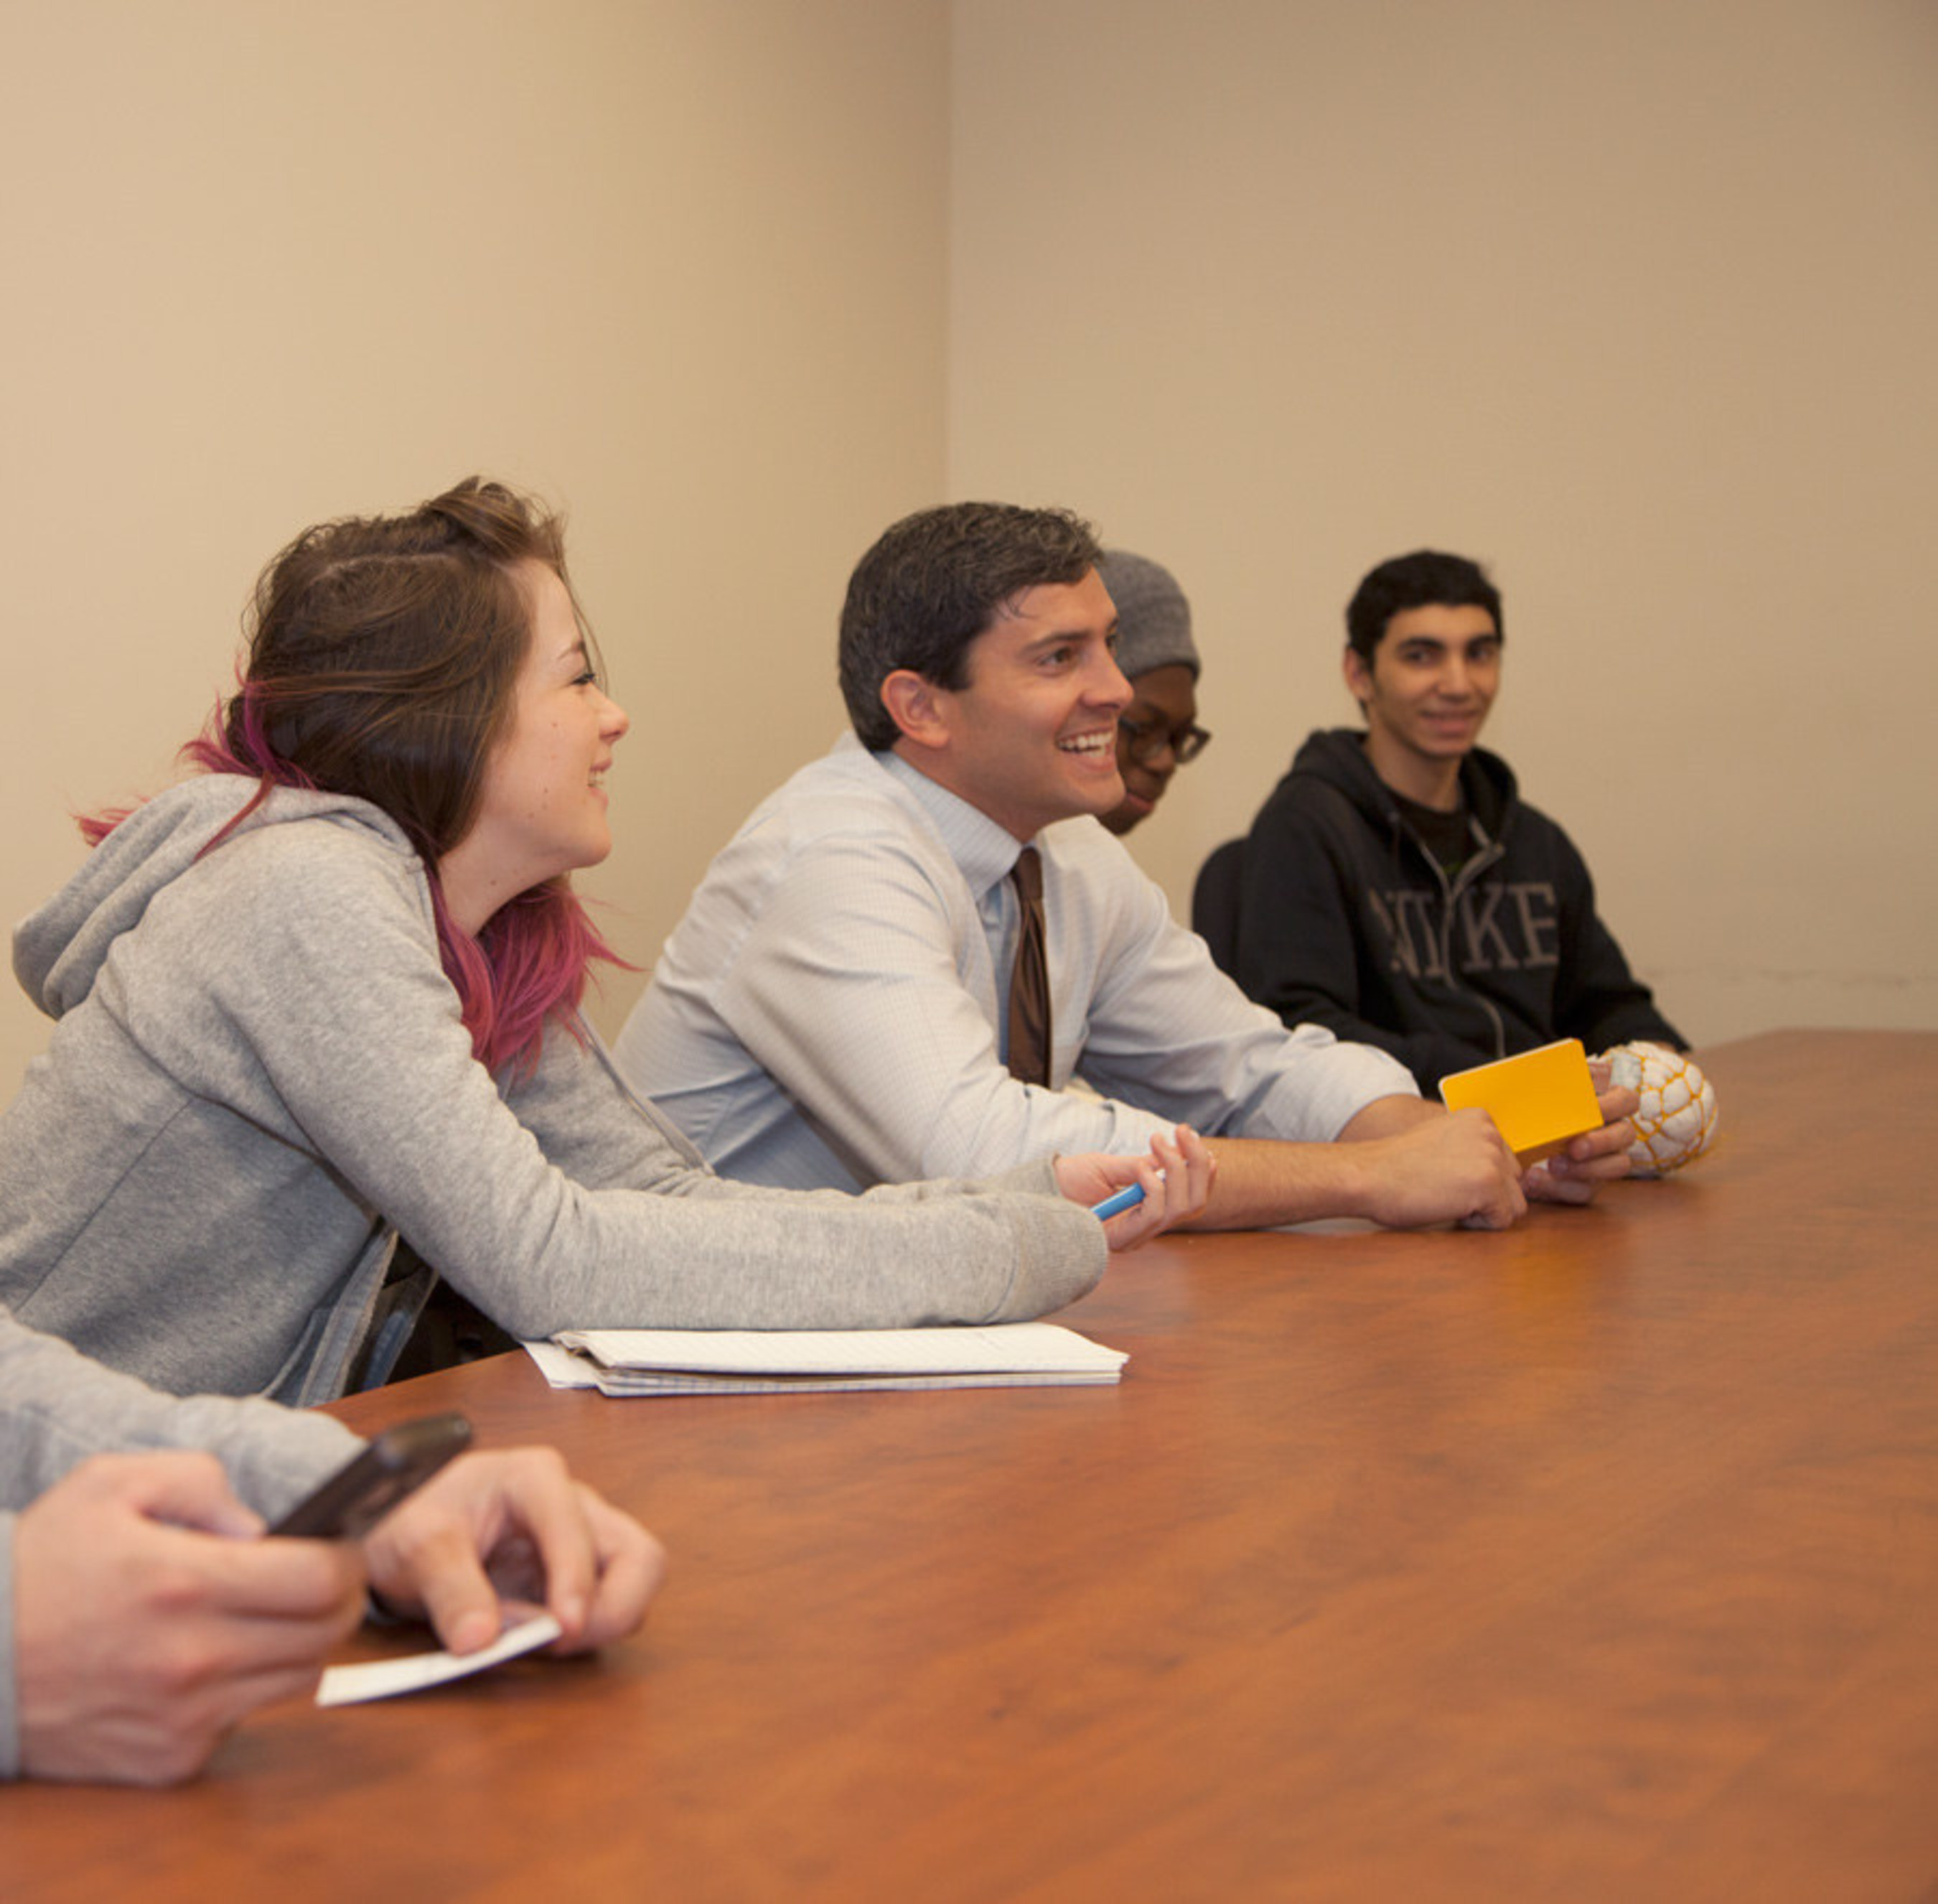 Rye Barcott (middle) meeting with BHCC students on November 6, 2014 at Bunker Hill Community College.